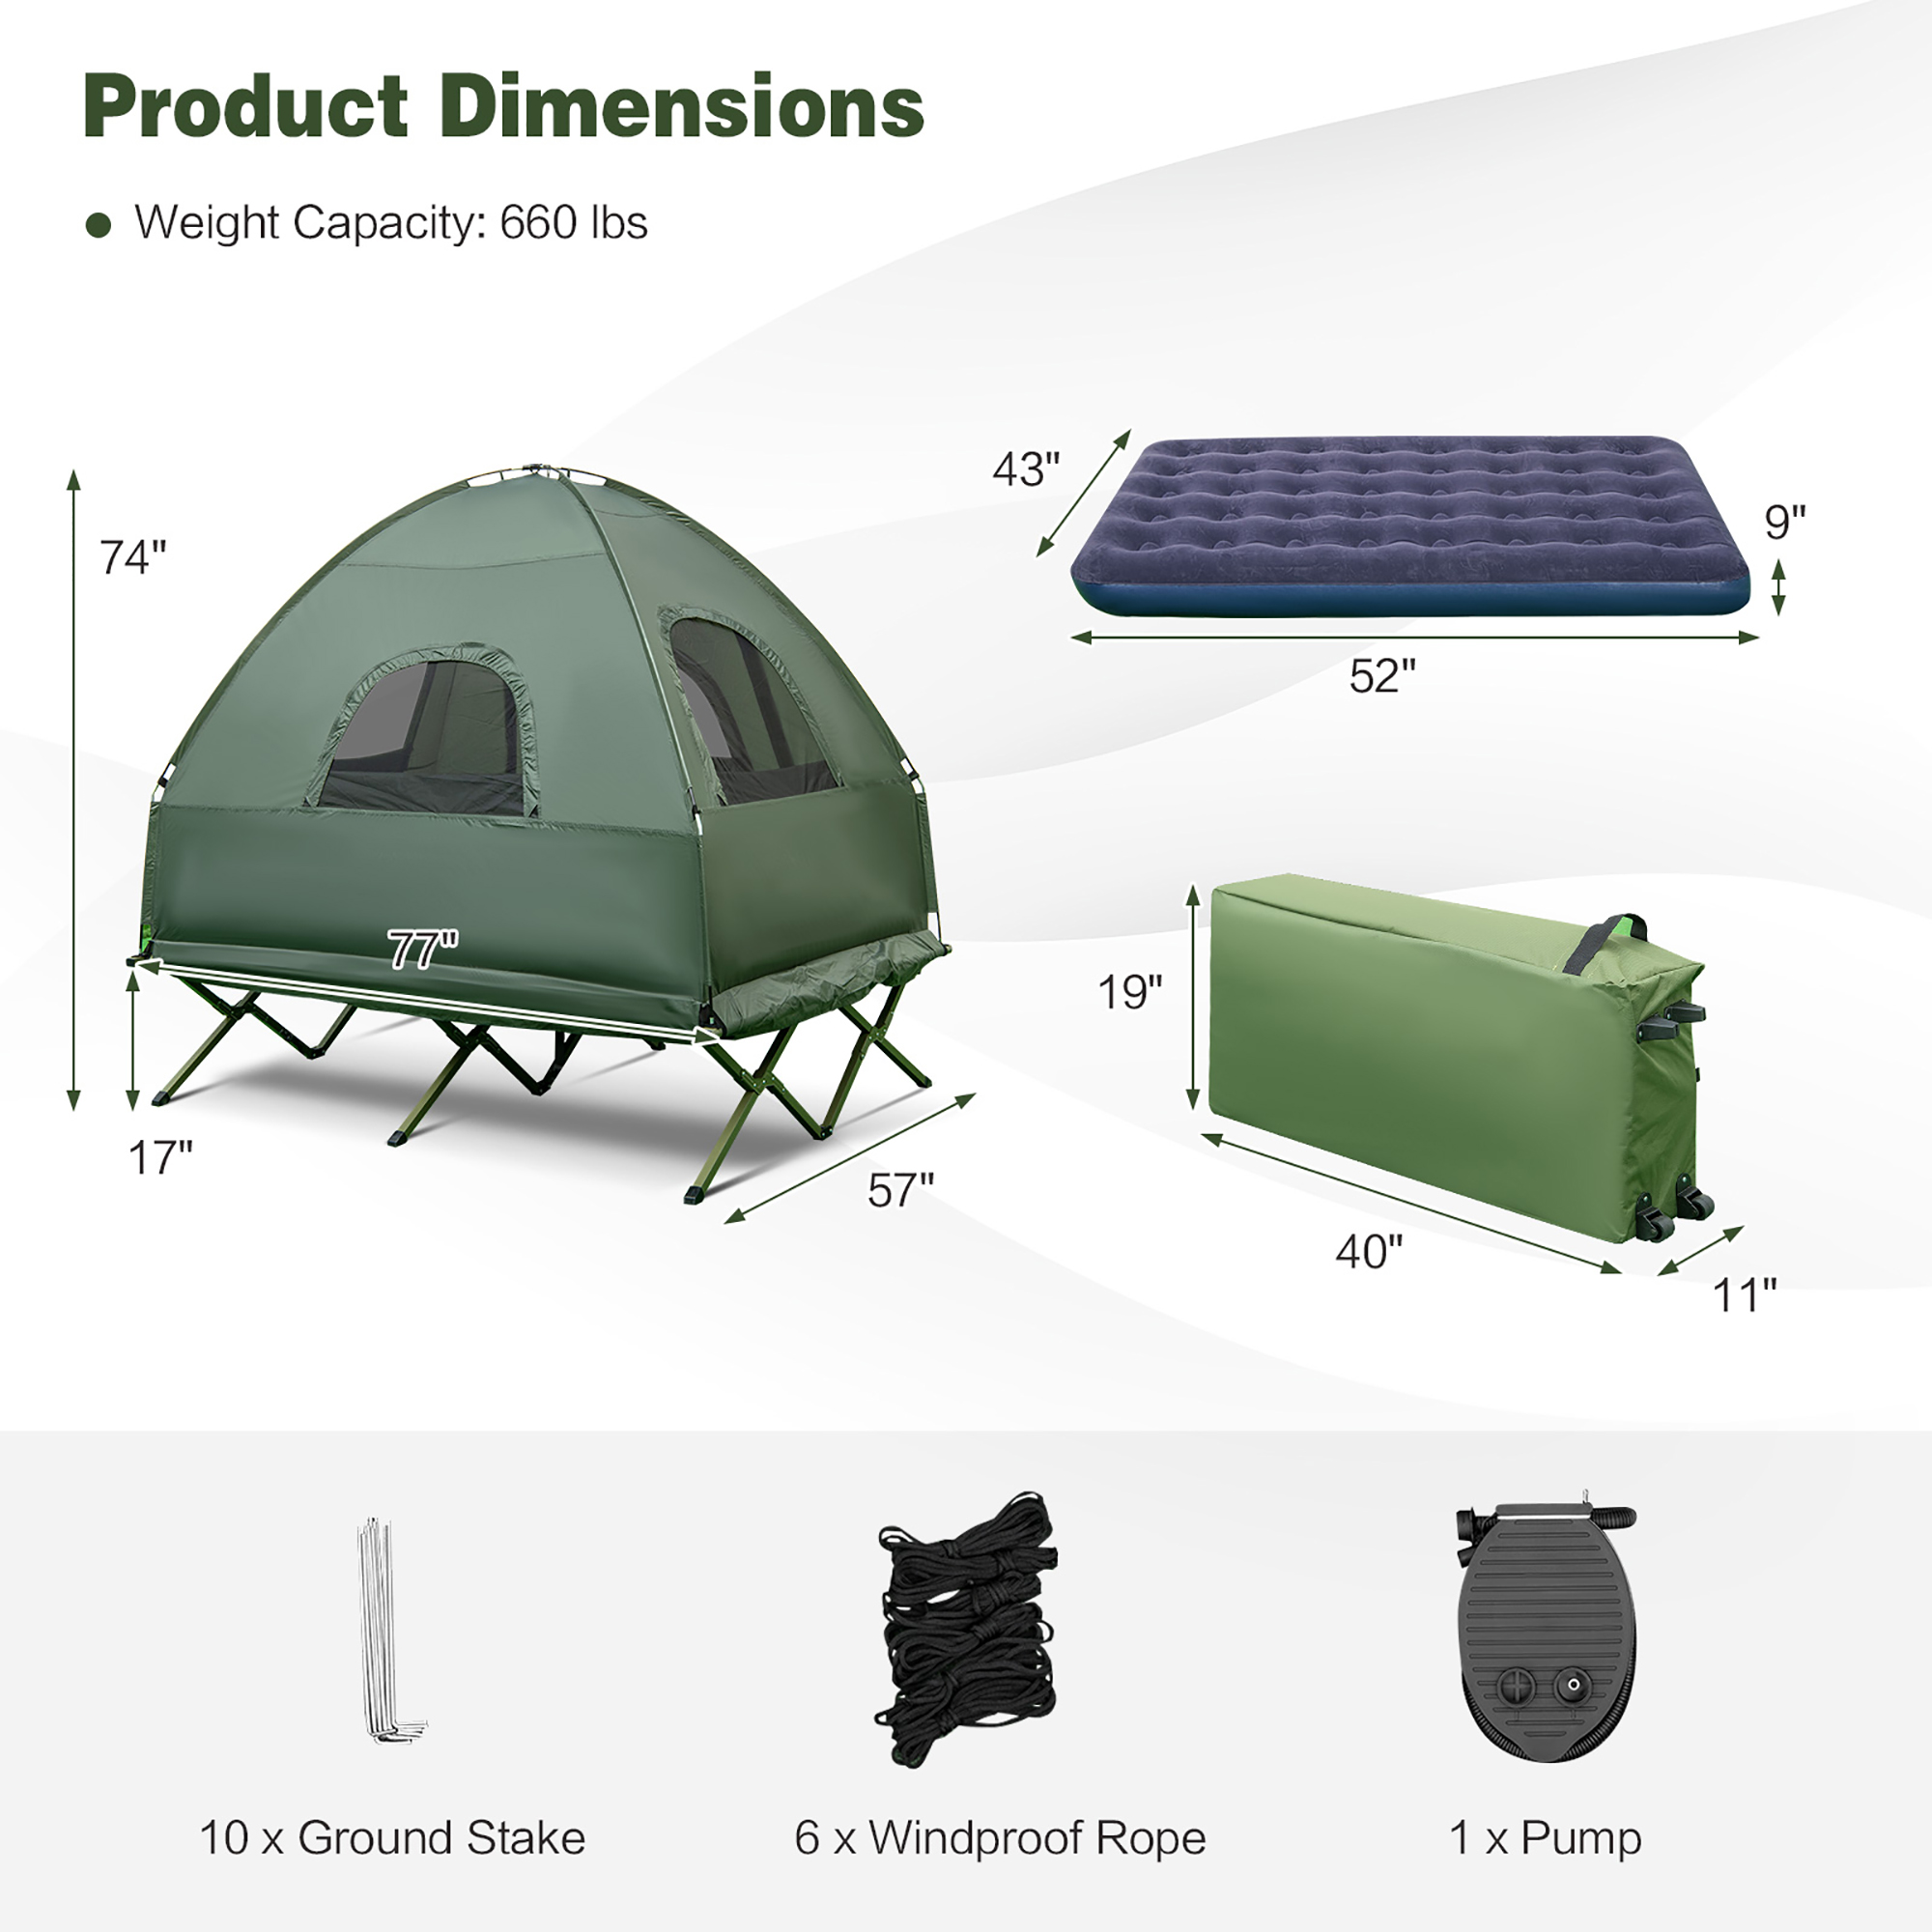 Gymax 2-Person Compact Portable Pop-Up Tent/Camping Cot w/ Air Mattress & Sleeping Bag - image 2 of 10